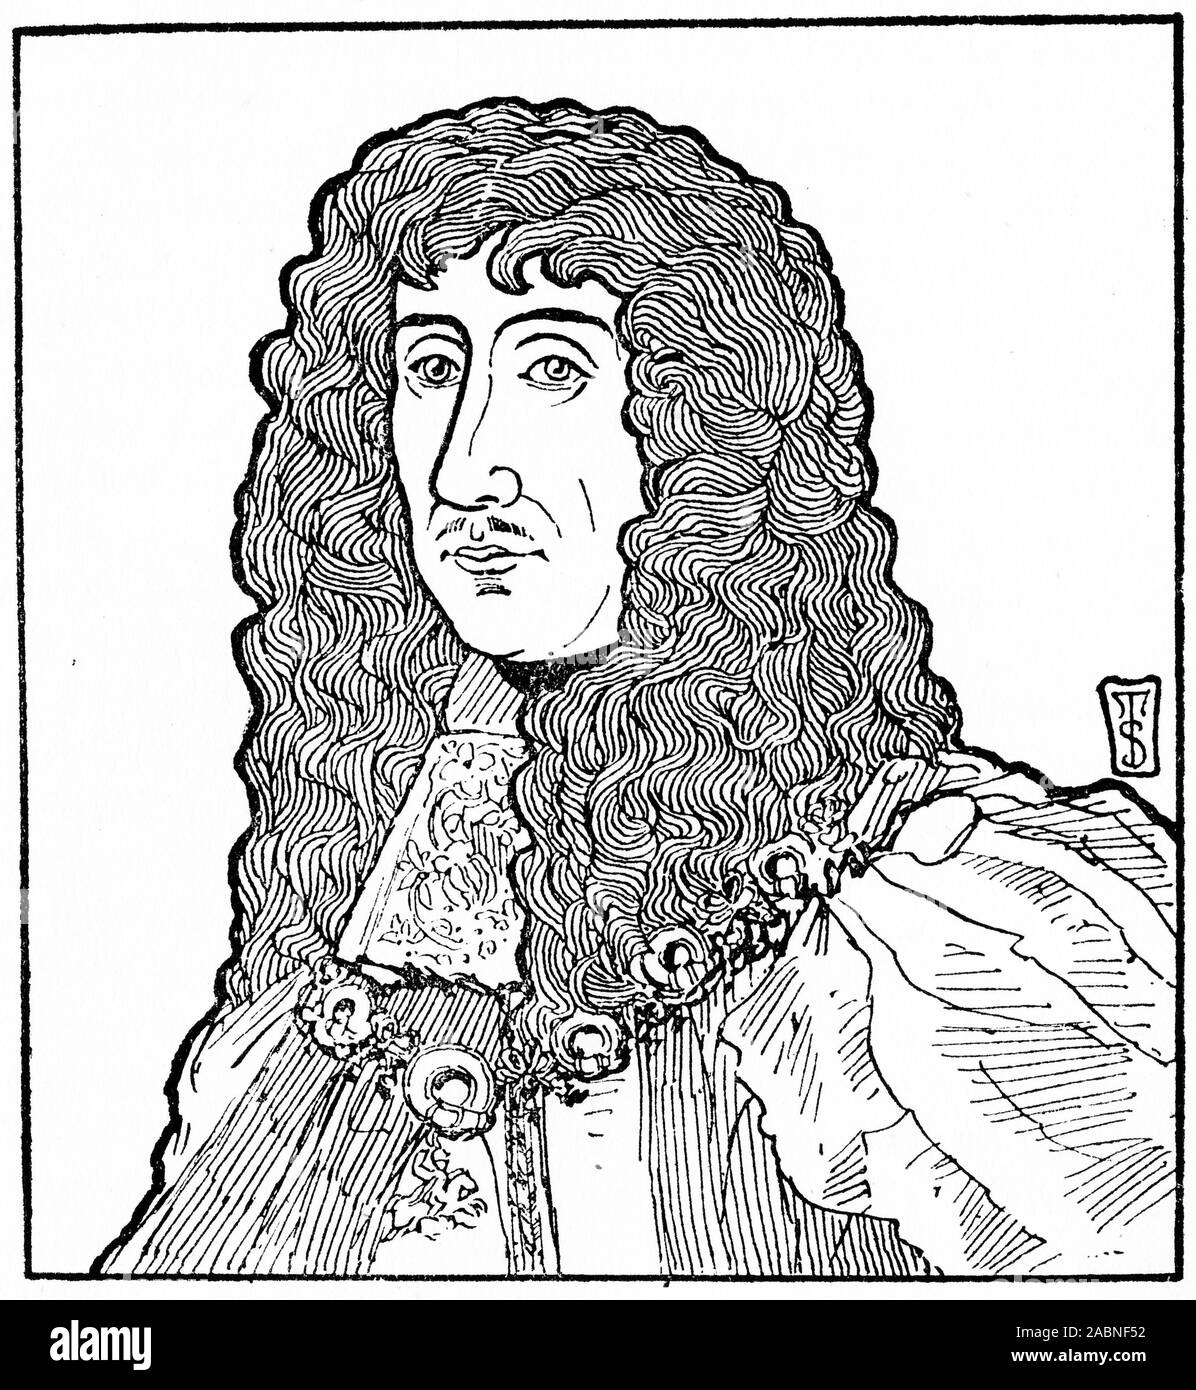 Engraved portrait of Charles II (1630 – 1685) king of England, Scotland, and Ireland. He was king of Scotland from 1649 until his deposition in 1651, and king of England, Scotland and Ireland from the 1660 Restoration of the monarchy until his death. Stock Photo